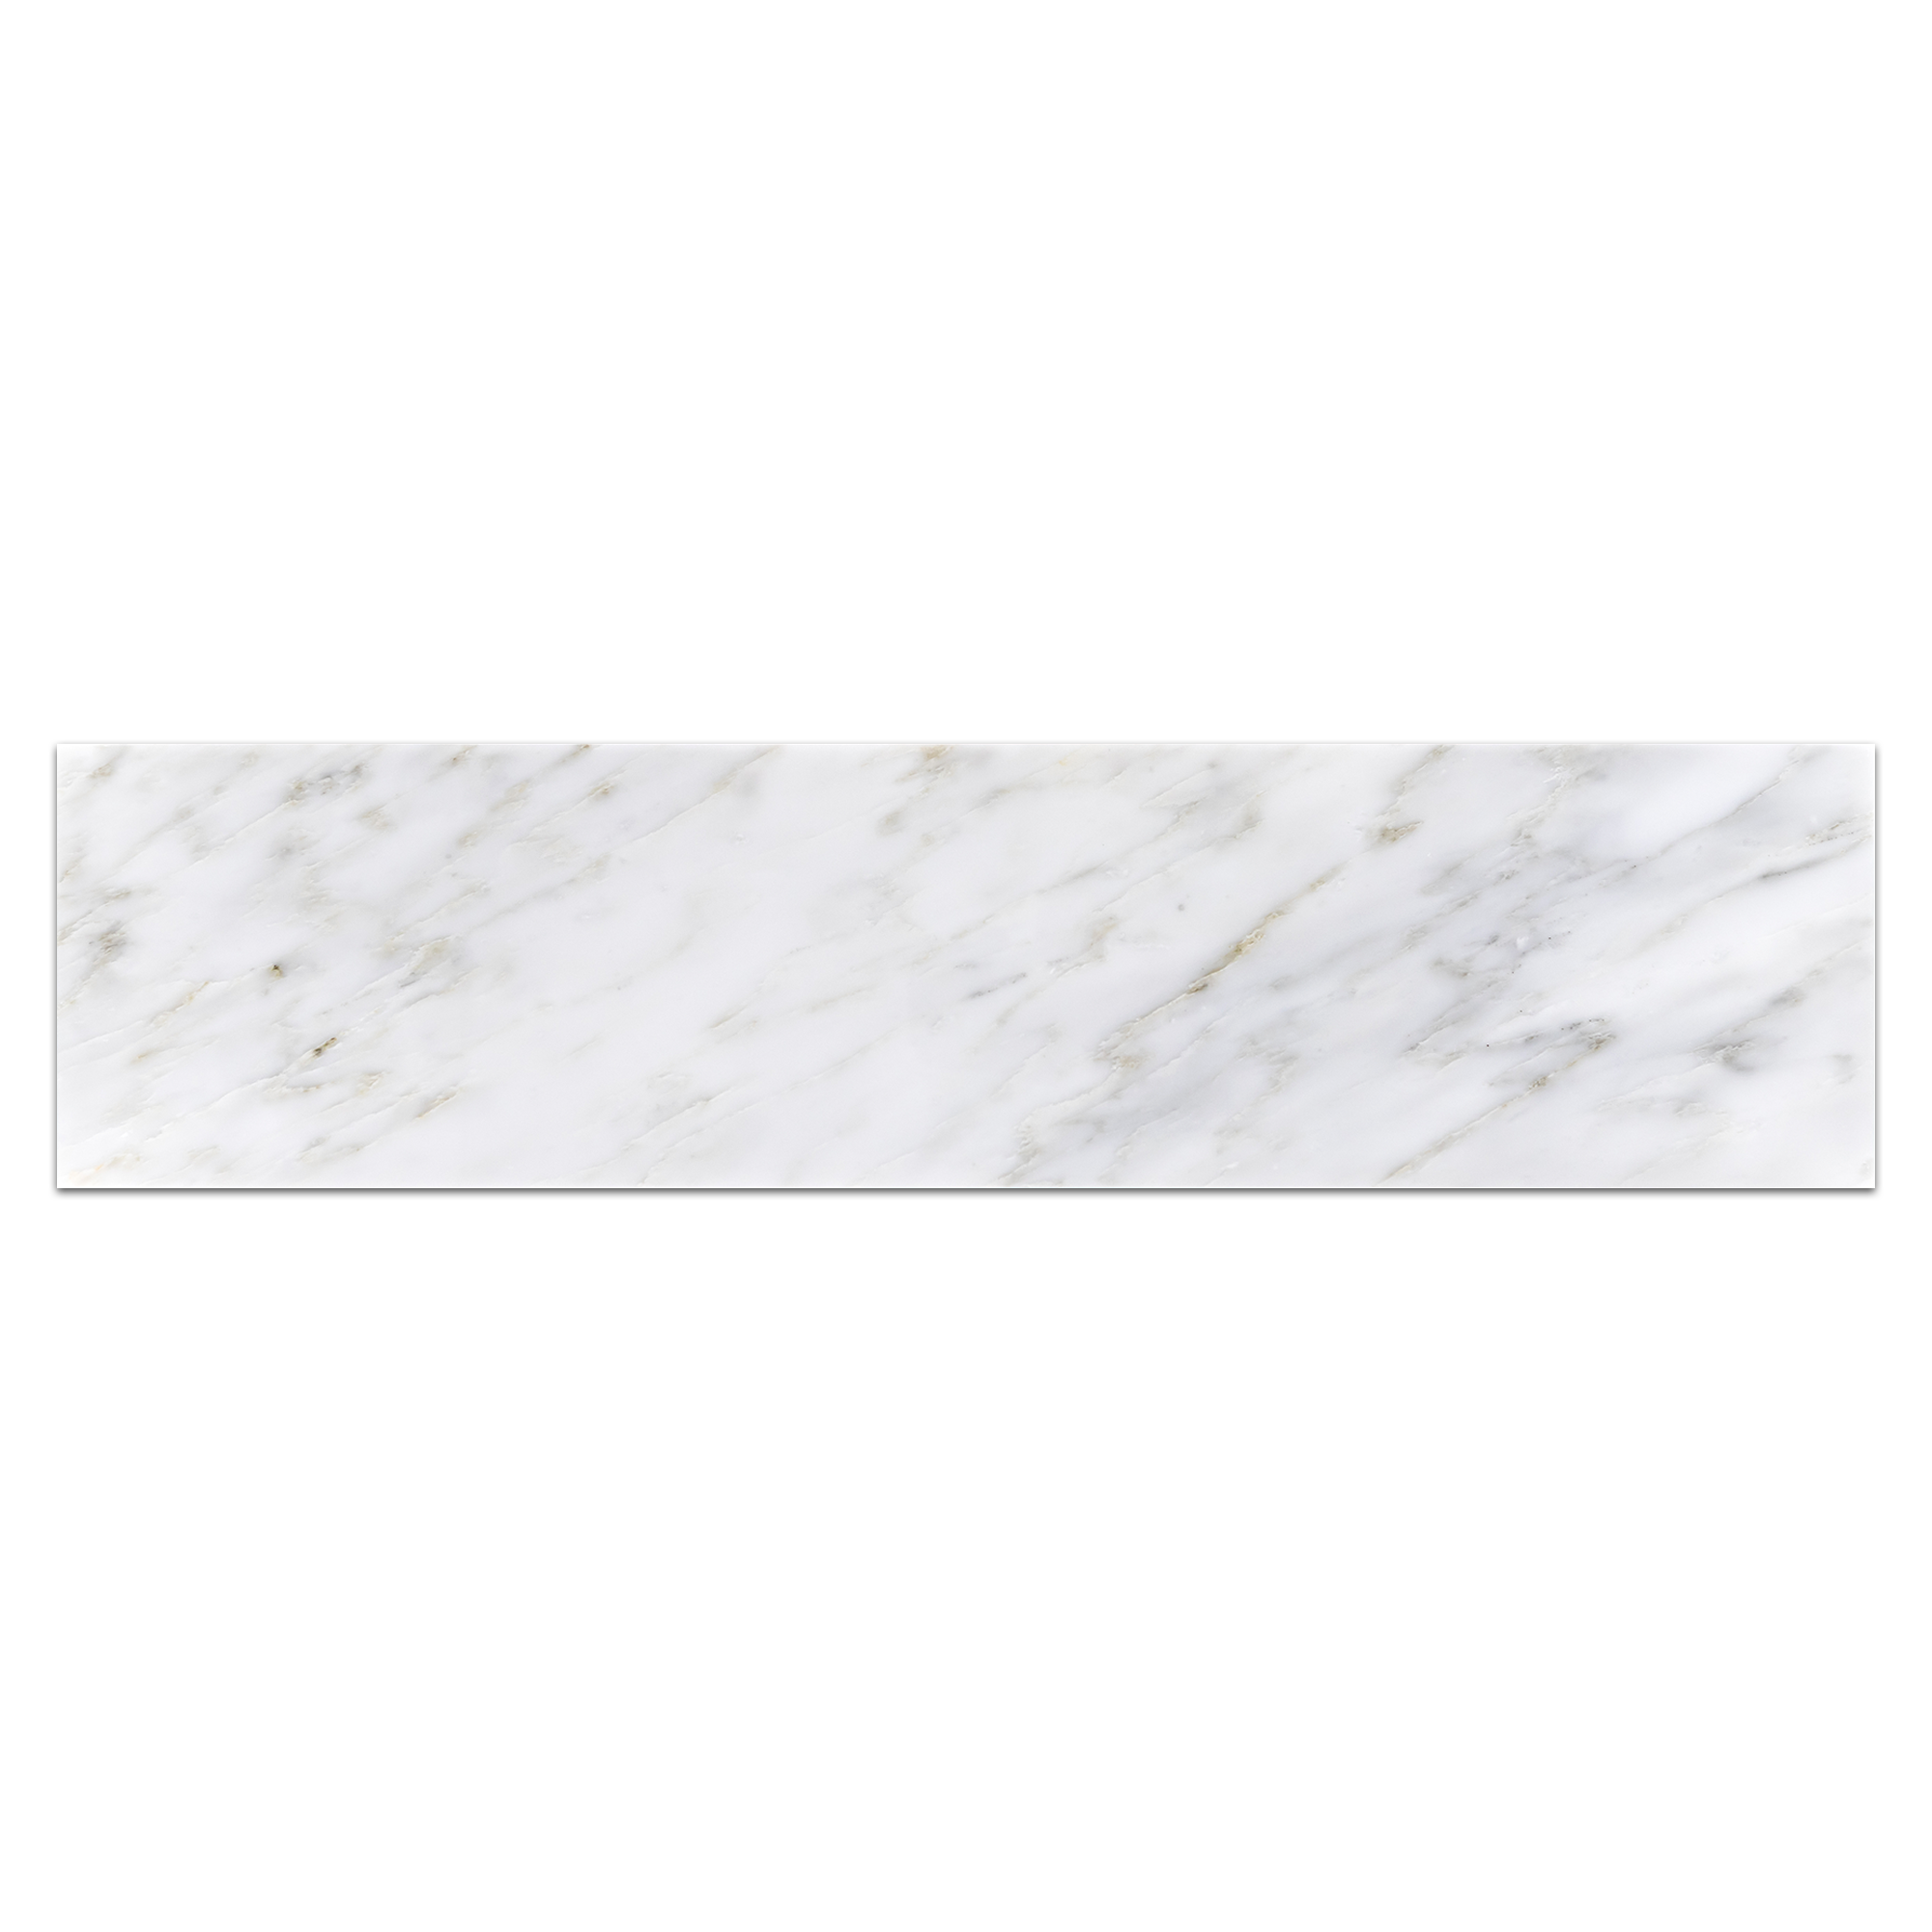 Elon Pearl White Marble Rectangle Field Tile 6x24x0.375 Polished - Surface Group International